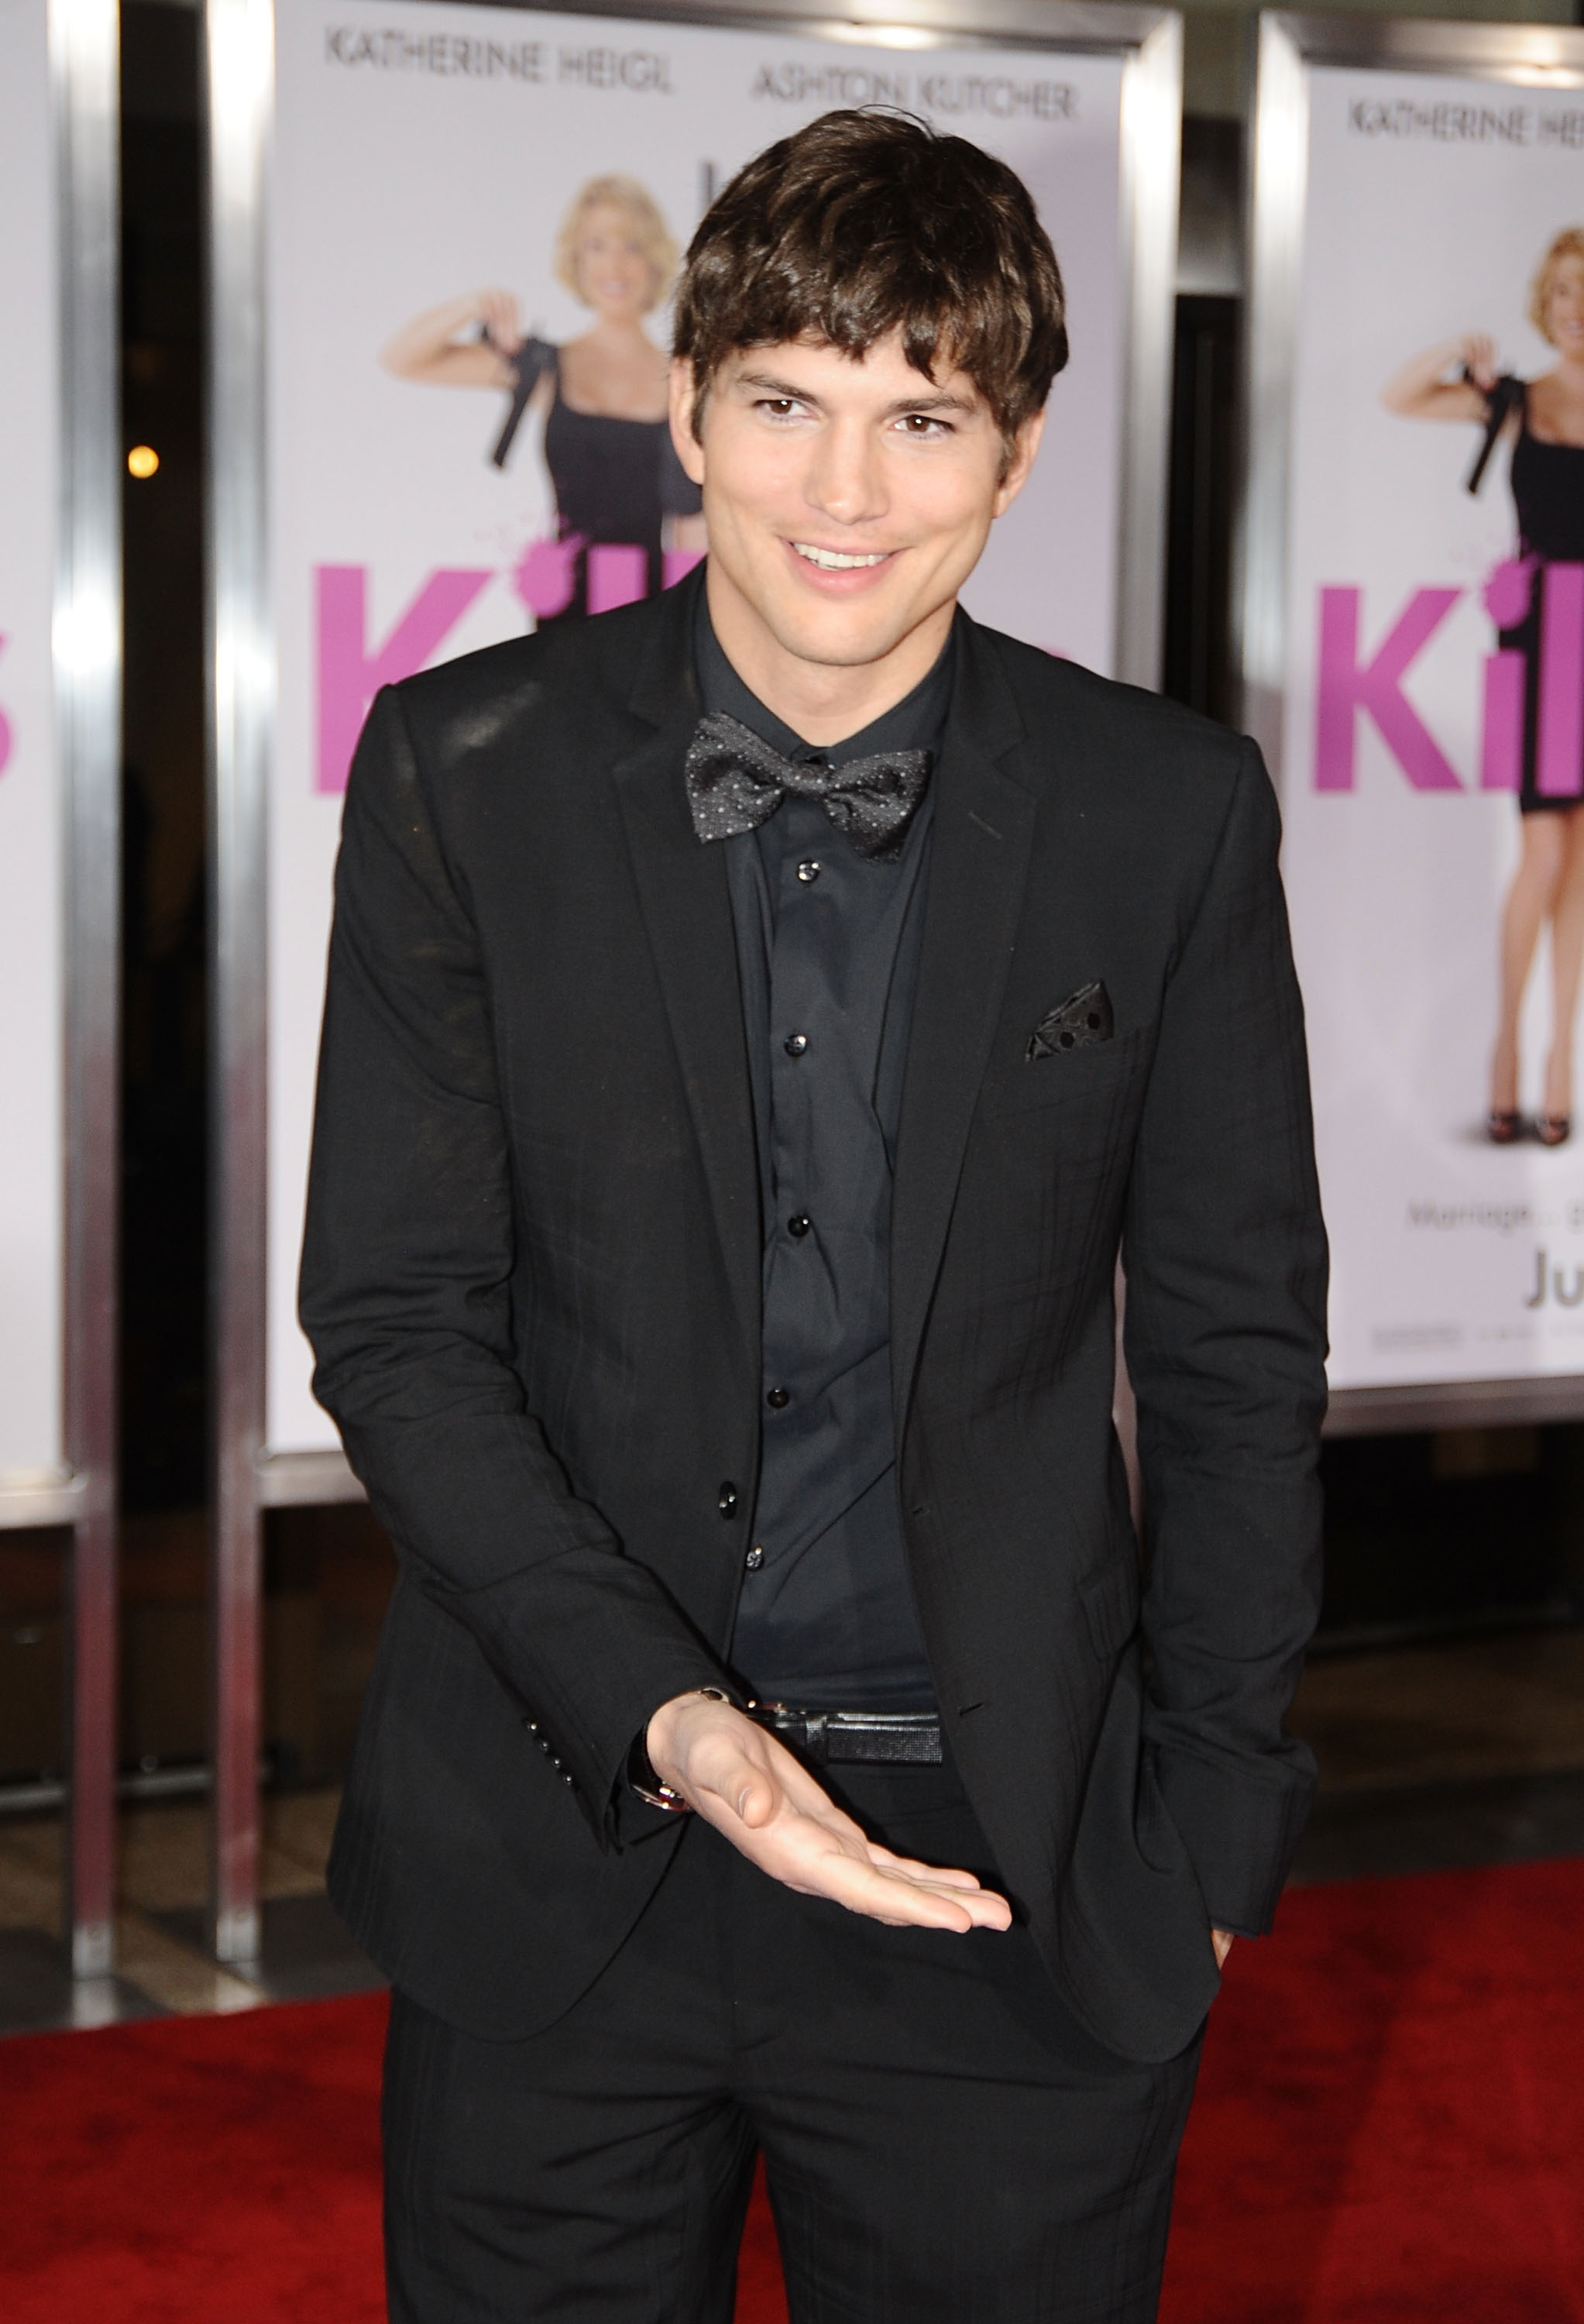 Ashton Kutcher arrives at the premiere of "Killers" held in Hollywood, California, on June 1, 2010. | Source: Getty Images